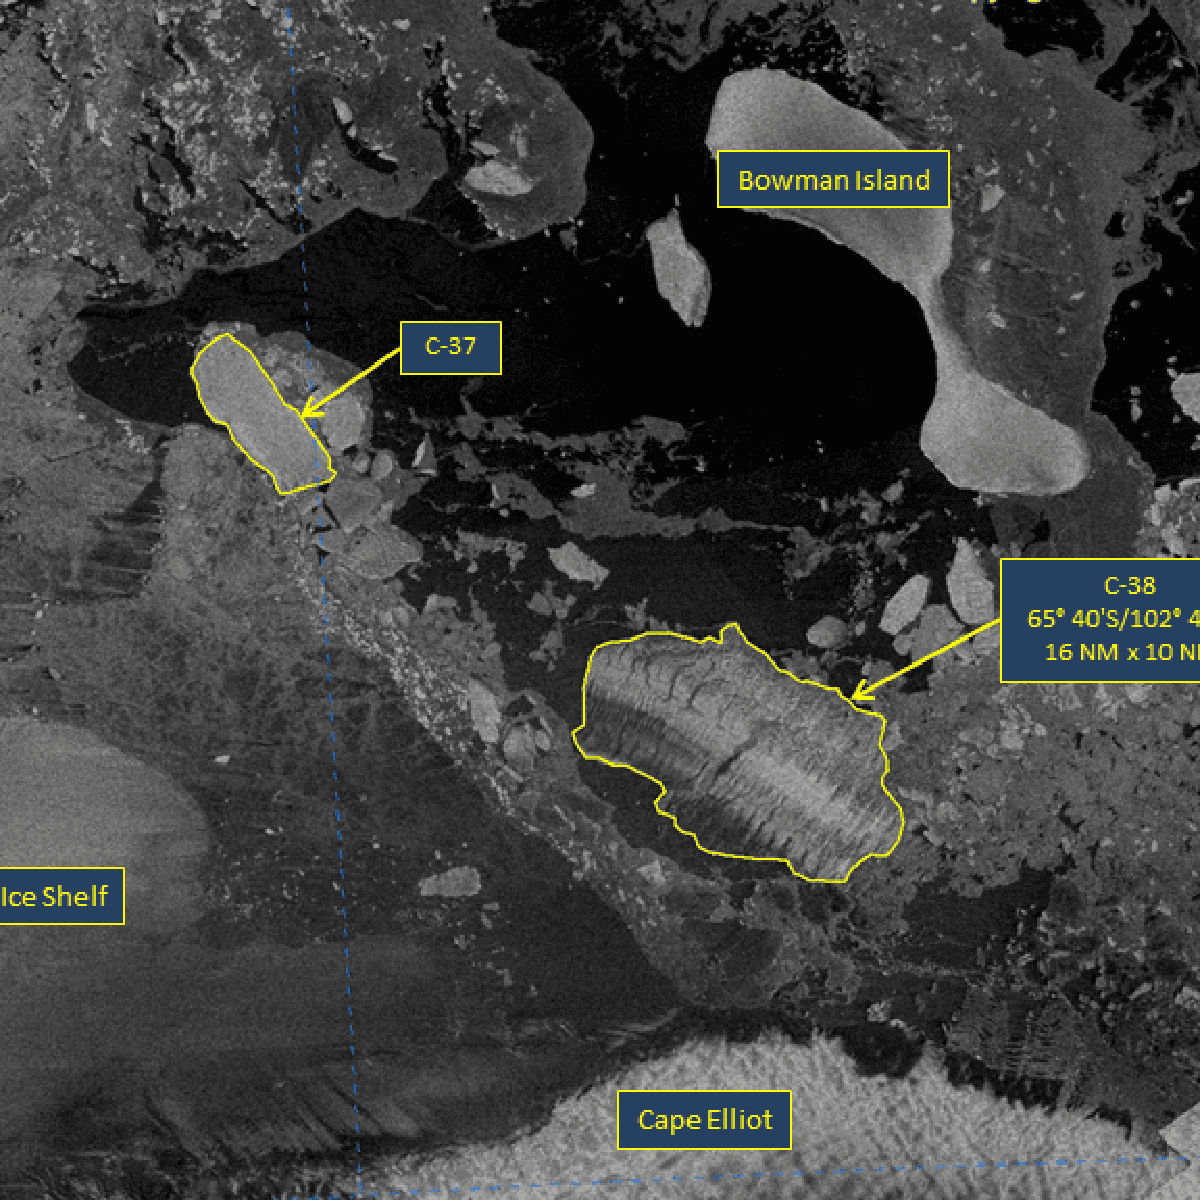 Satellite data shows entire Conger ice shelf has collapsed in